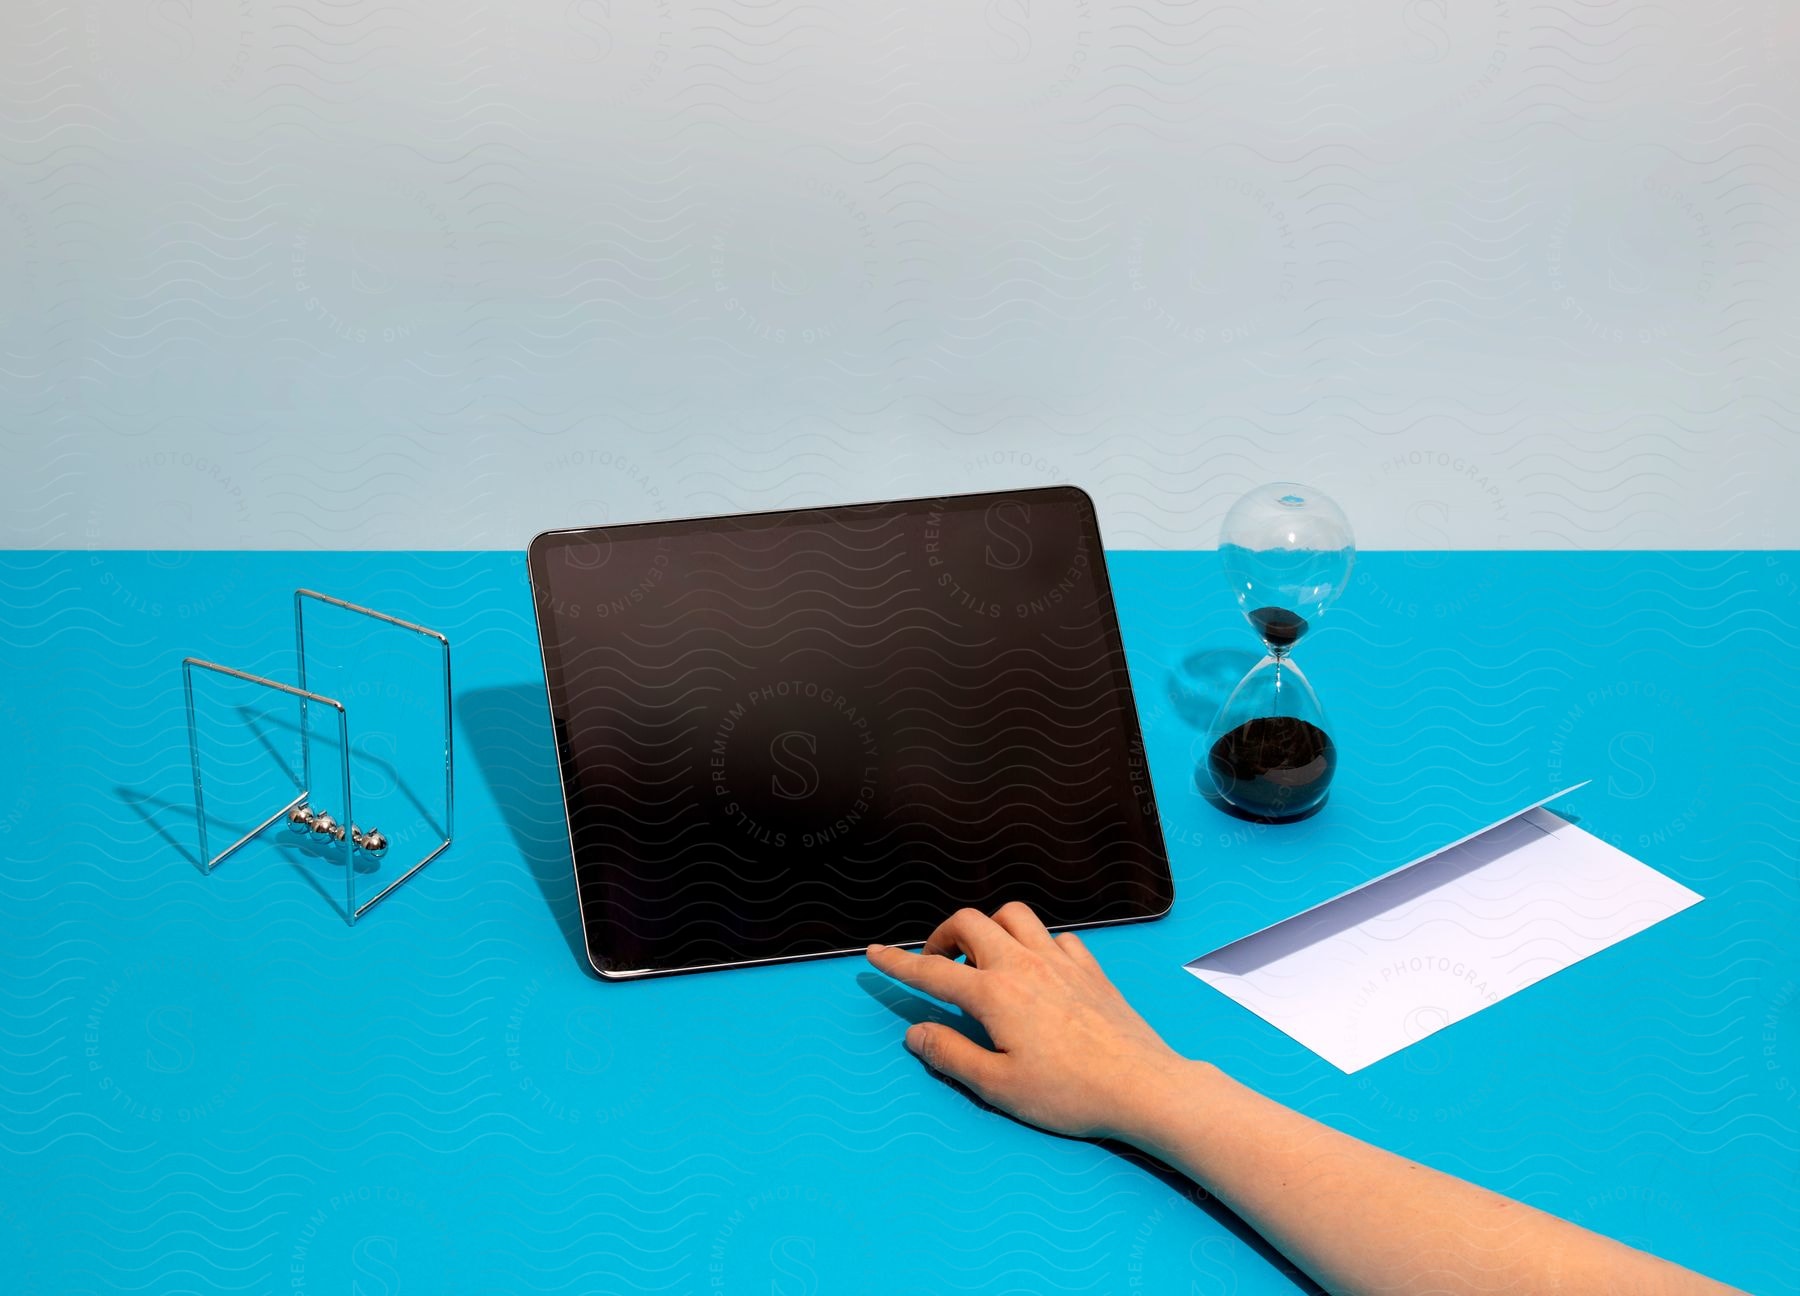 A girl's hand is pointing at a tablet computer on a light blue table between a Newton's cradle and an hourglass